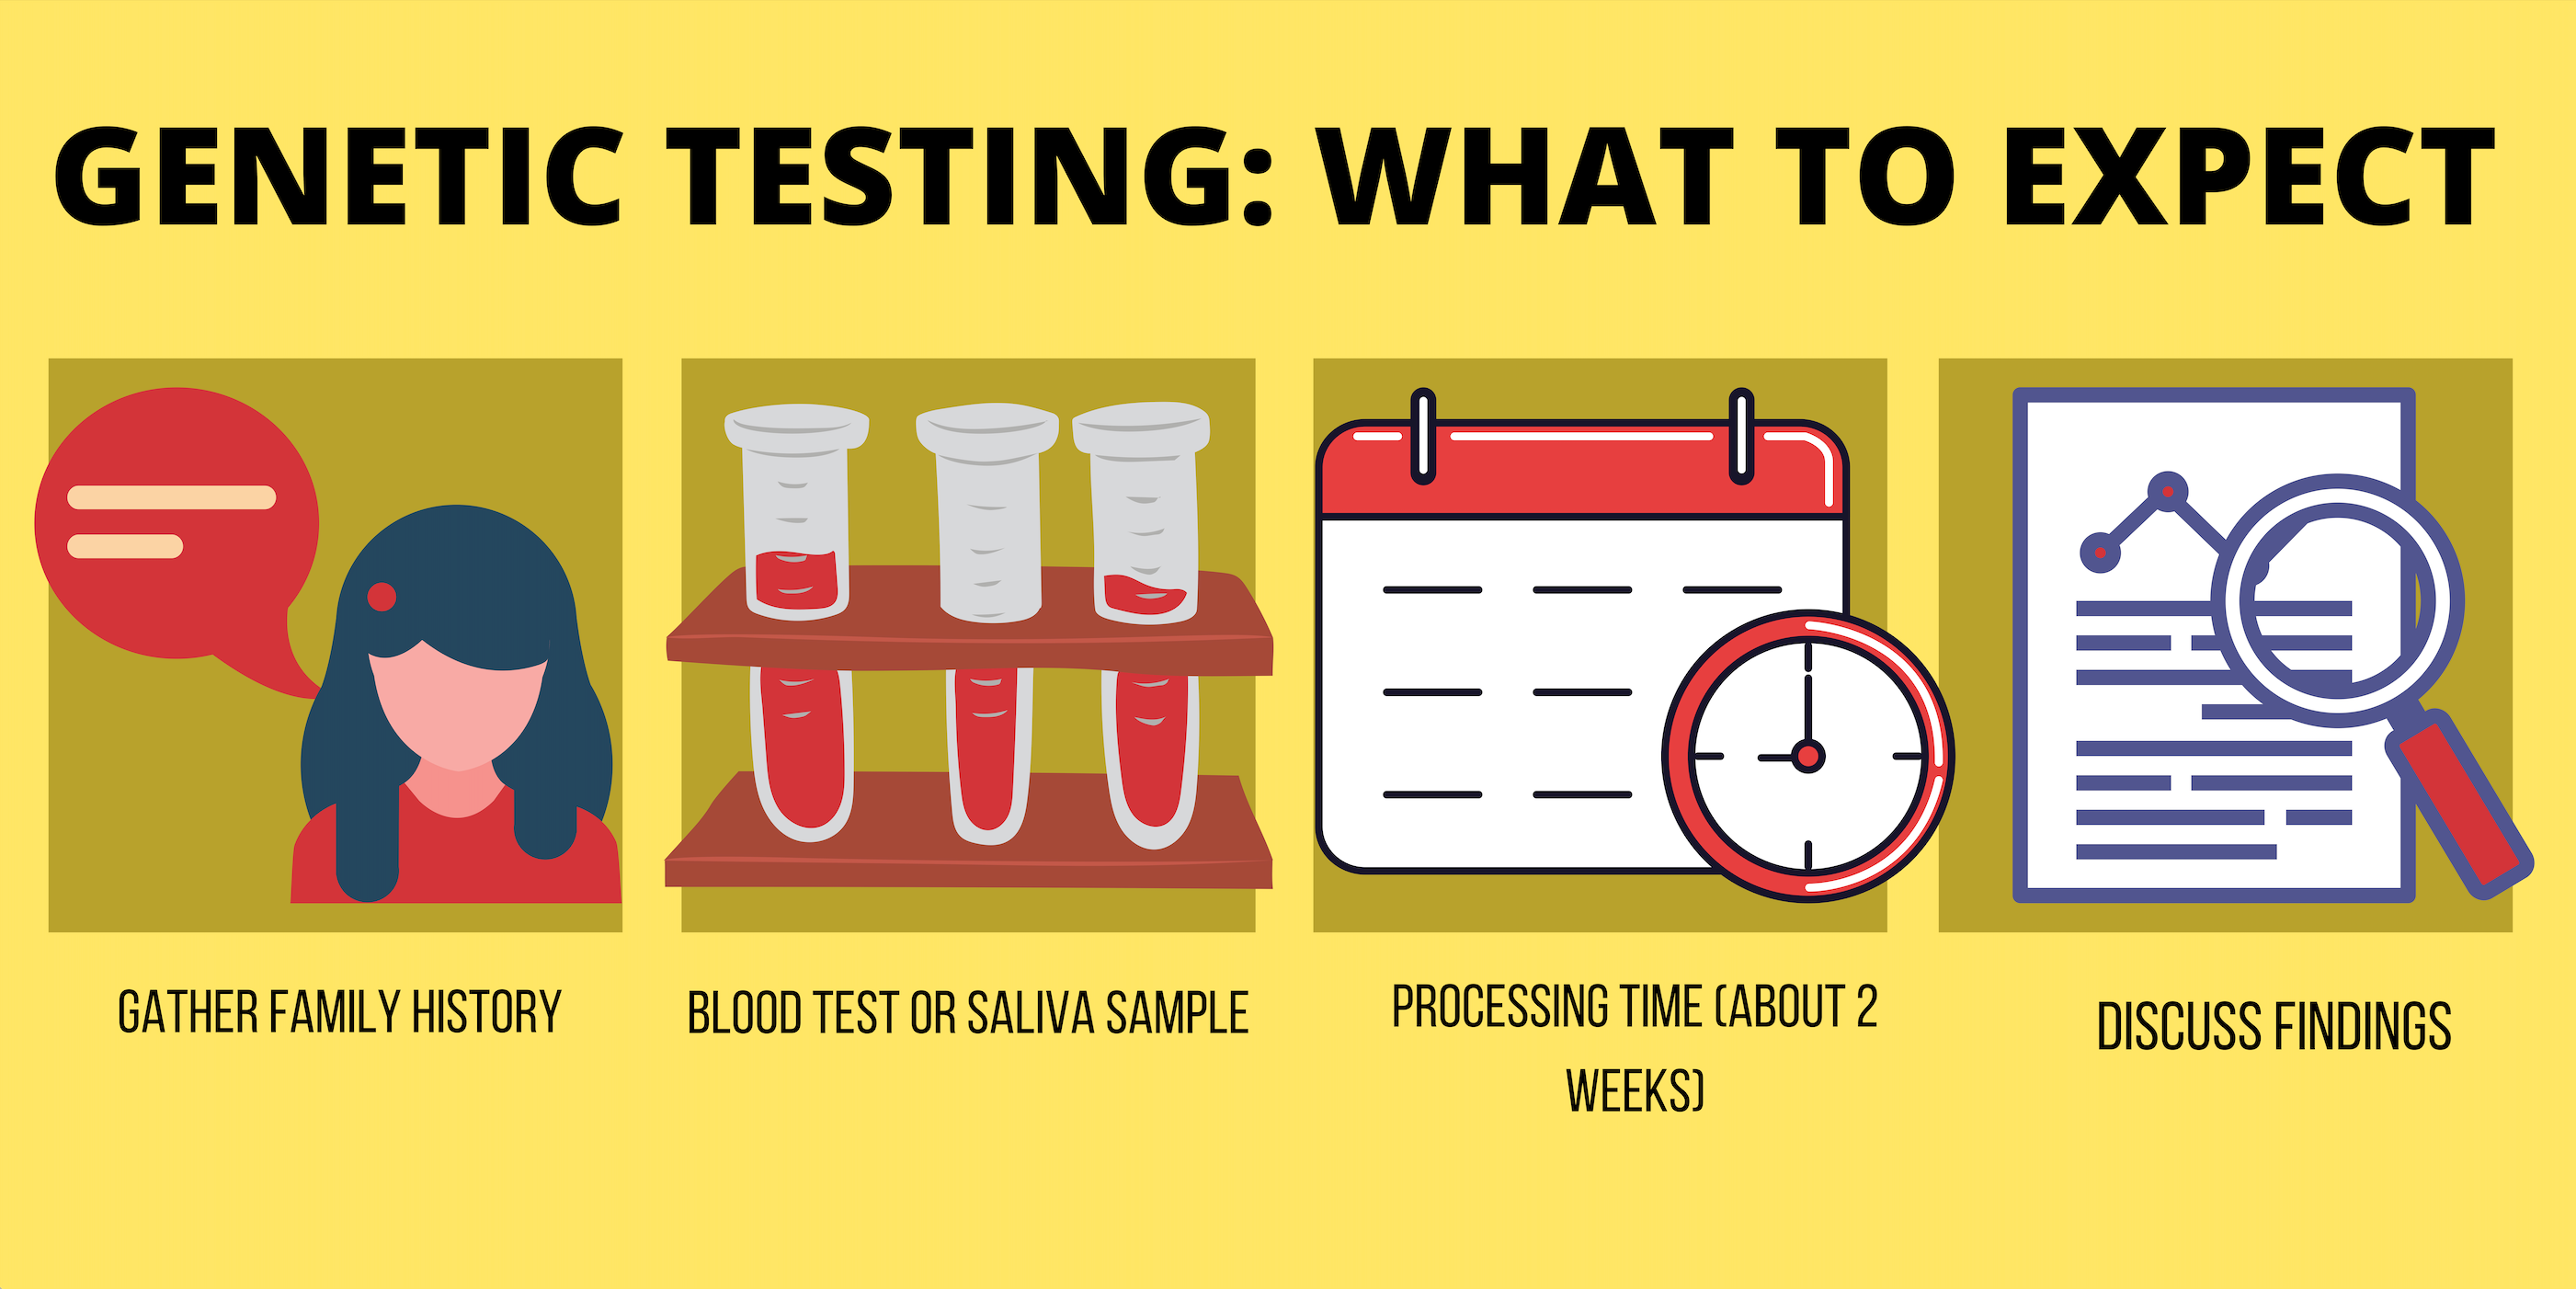 A Step-by-Step Guide to Cancer Genetic Testing